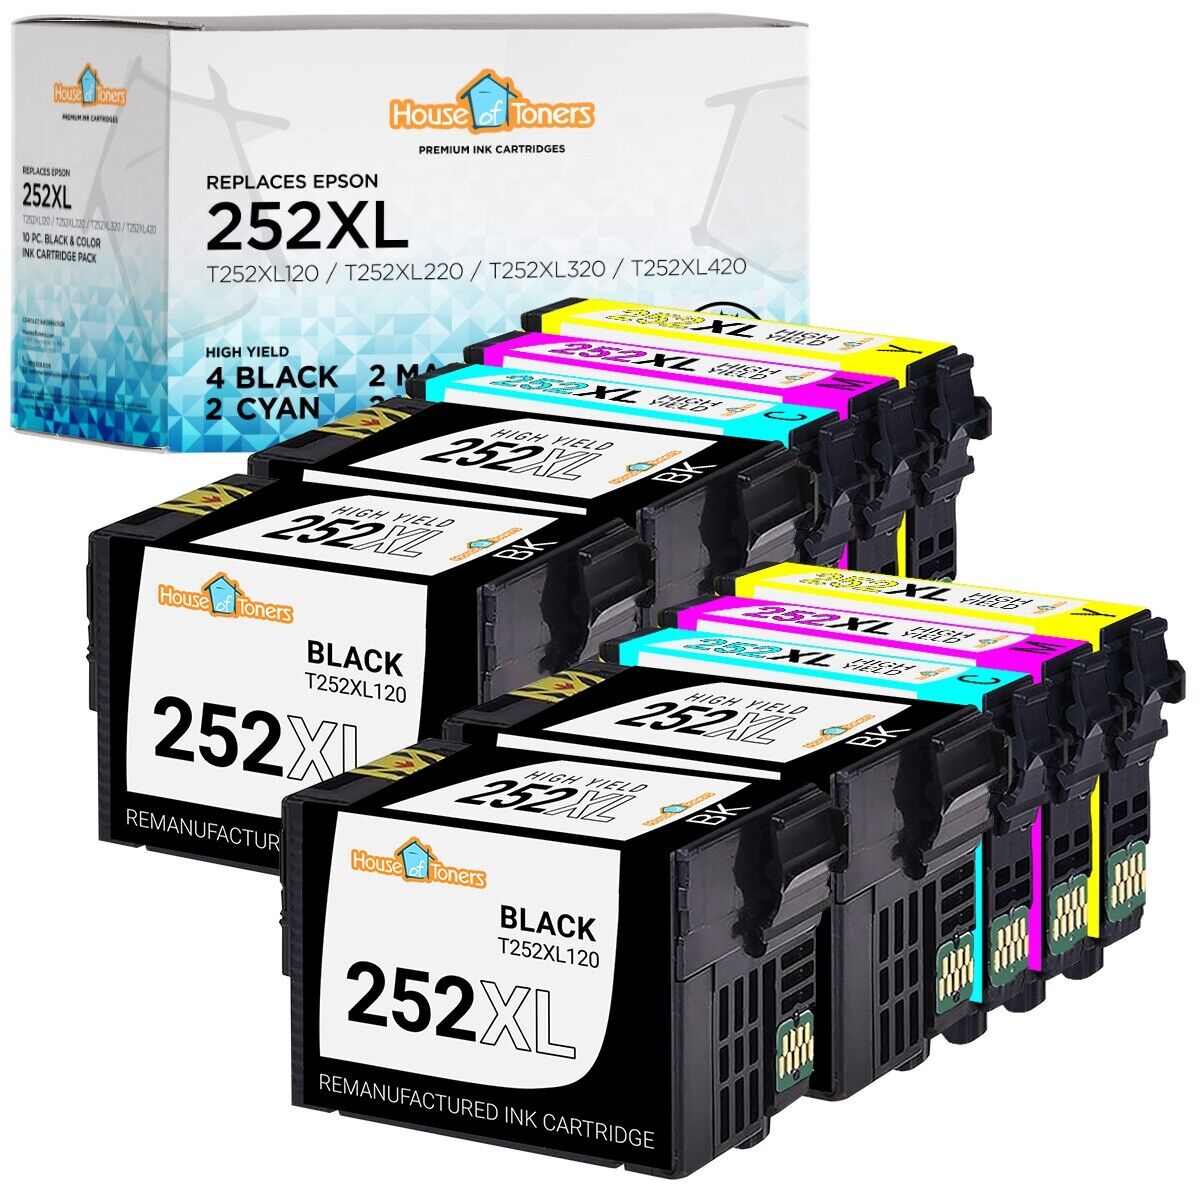 252 XL 252XL Replacement Epson Ink Cartridges for WorkForce WF-3620 WF-3640